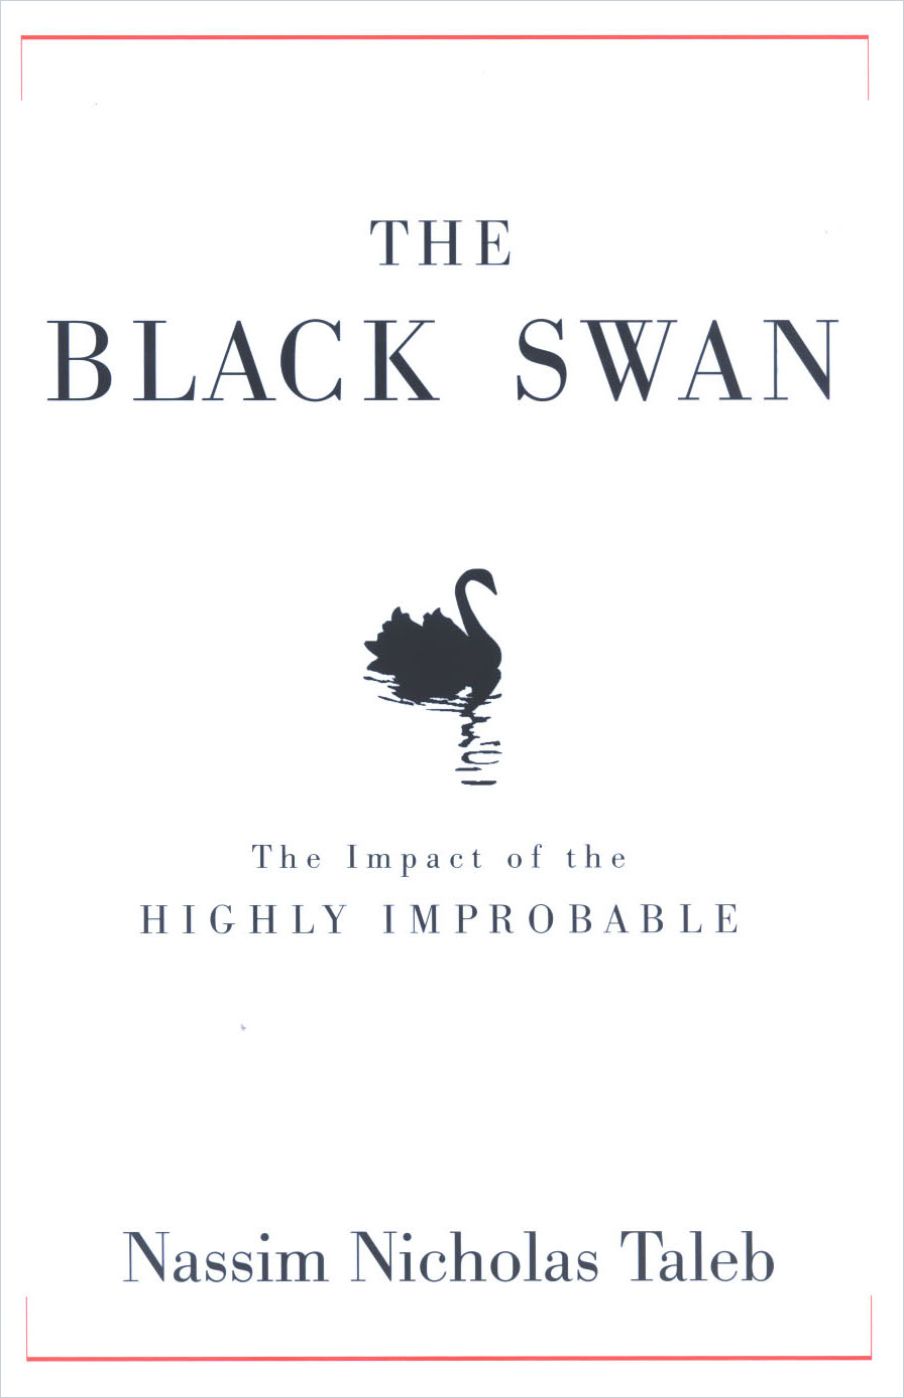 Image of: The Black Swan